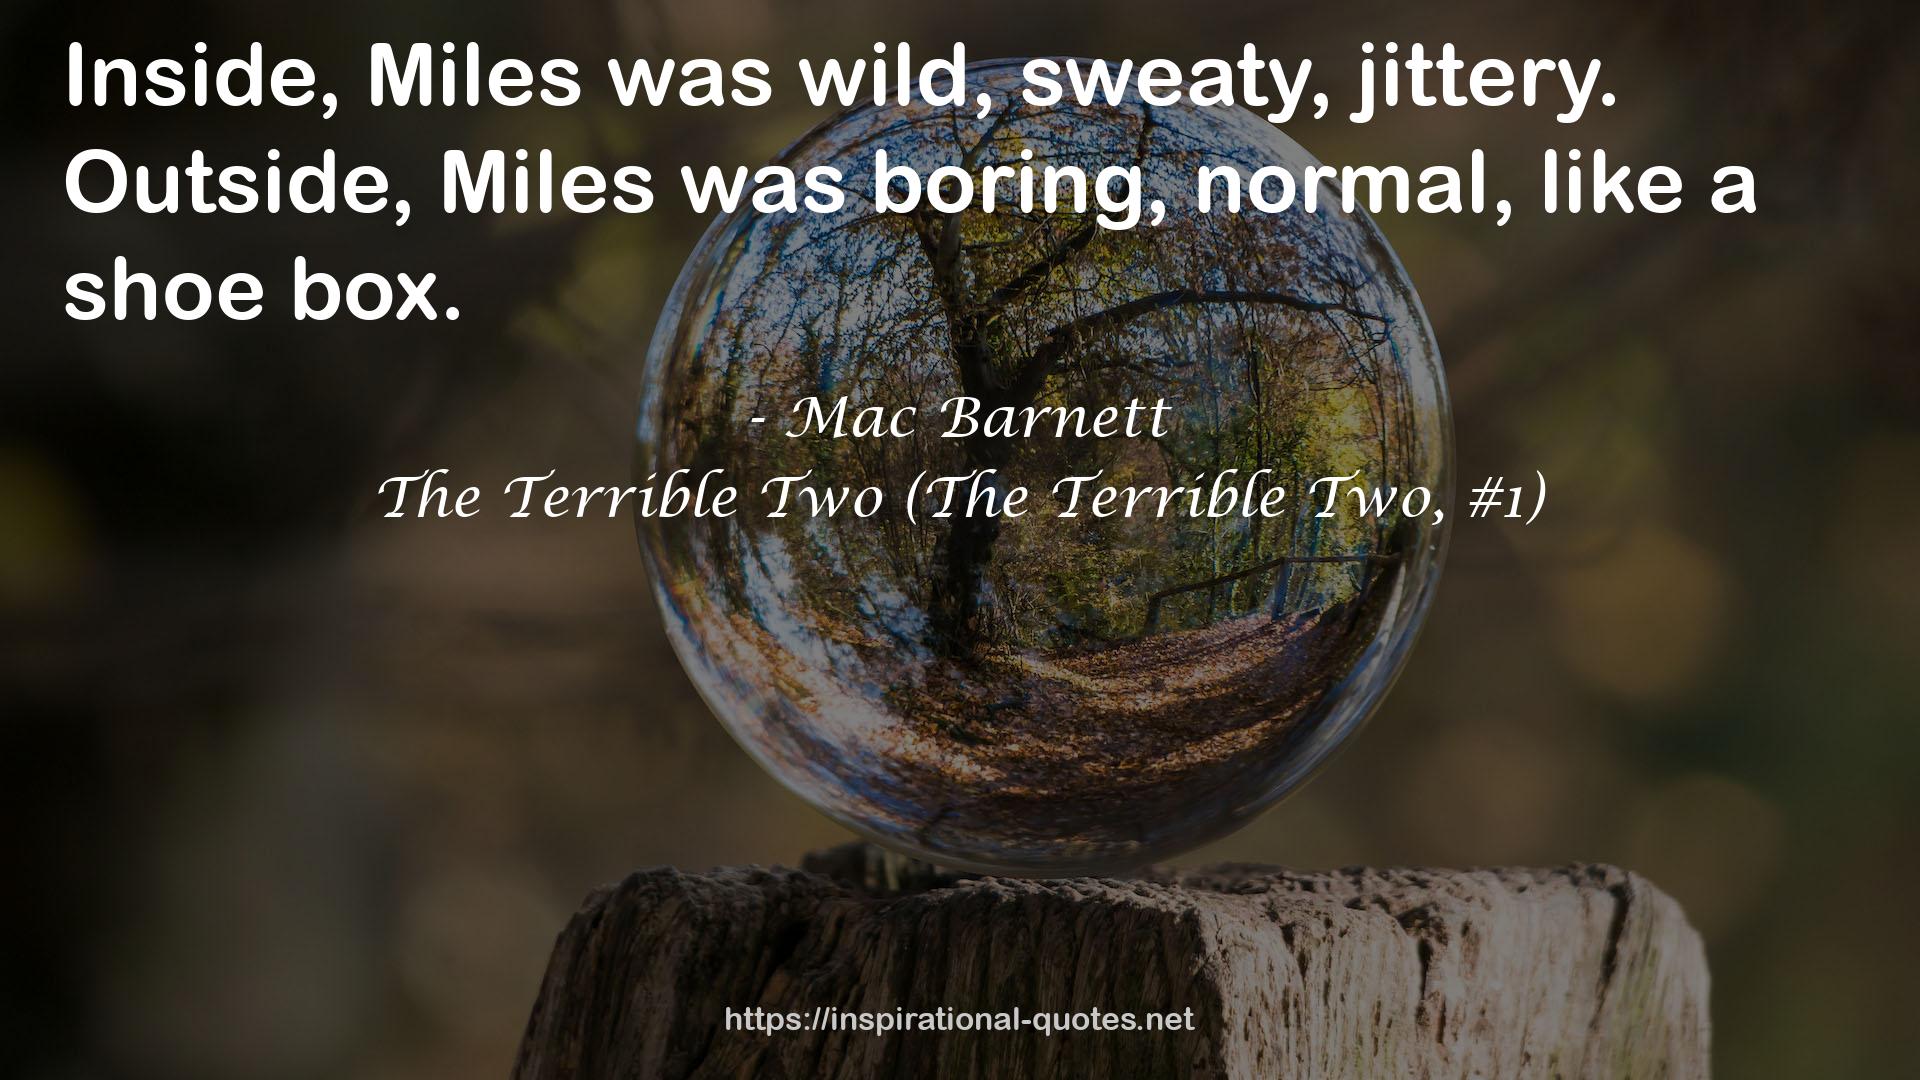 The Terrible Two (The Terrible Two, #1) QUOTES